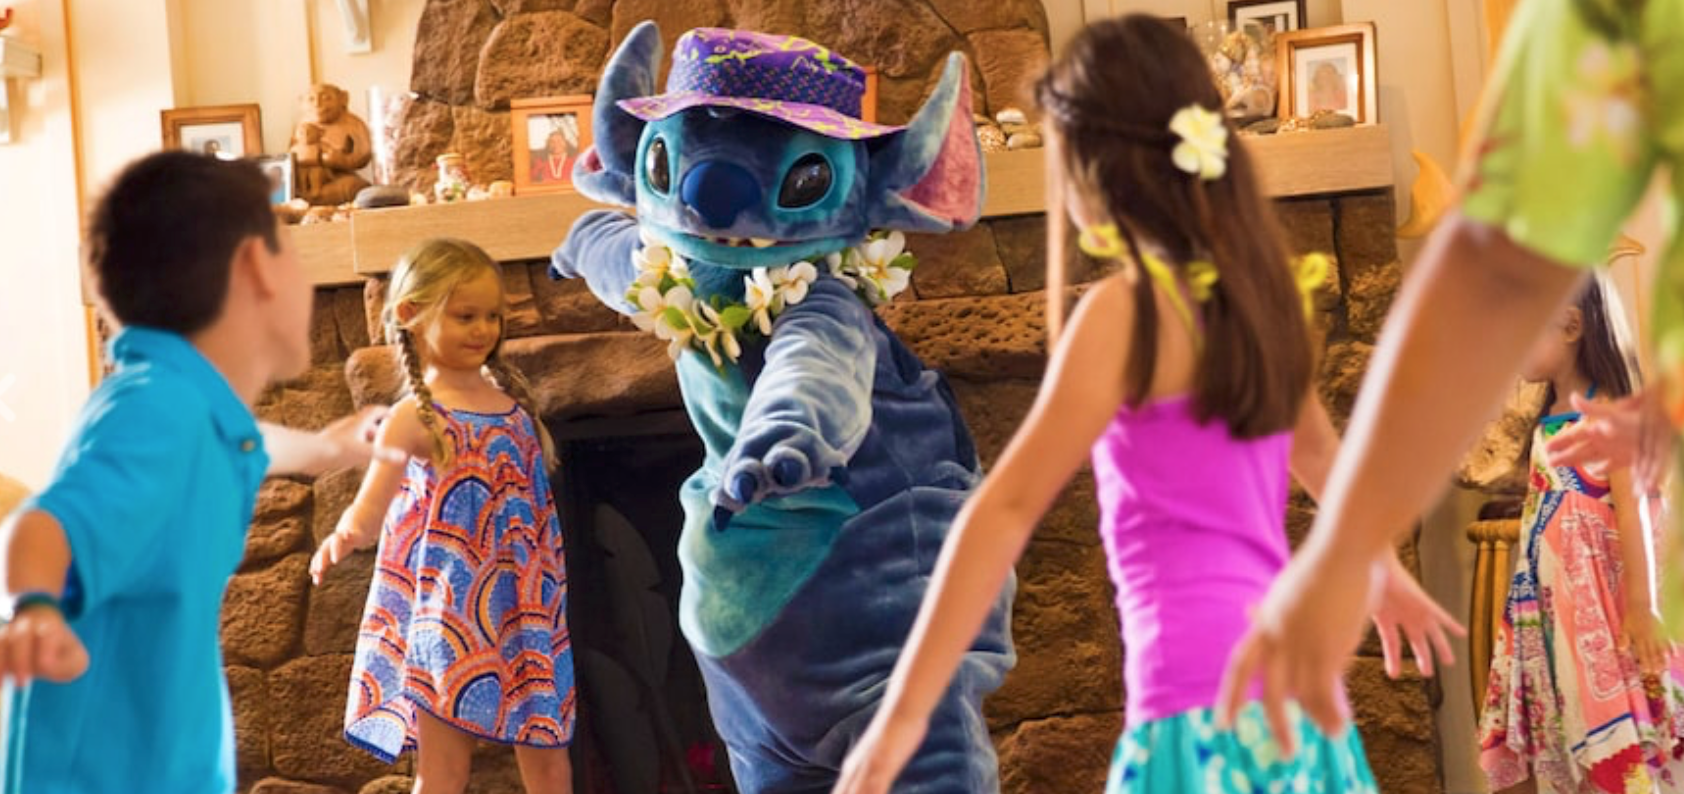 Aulani Disney Hawaii Resort | Budgeting for a big family vacation can be really difficult! Florida travel blogger, MikaelaJ, shares the Top 5 All-Inclusive Resorts for Families!